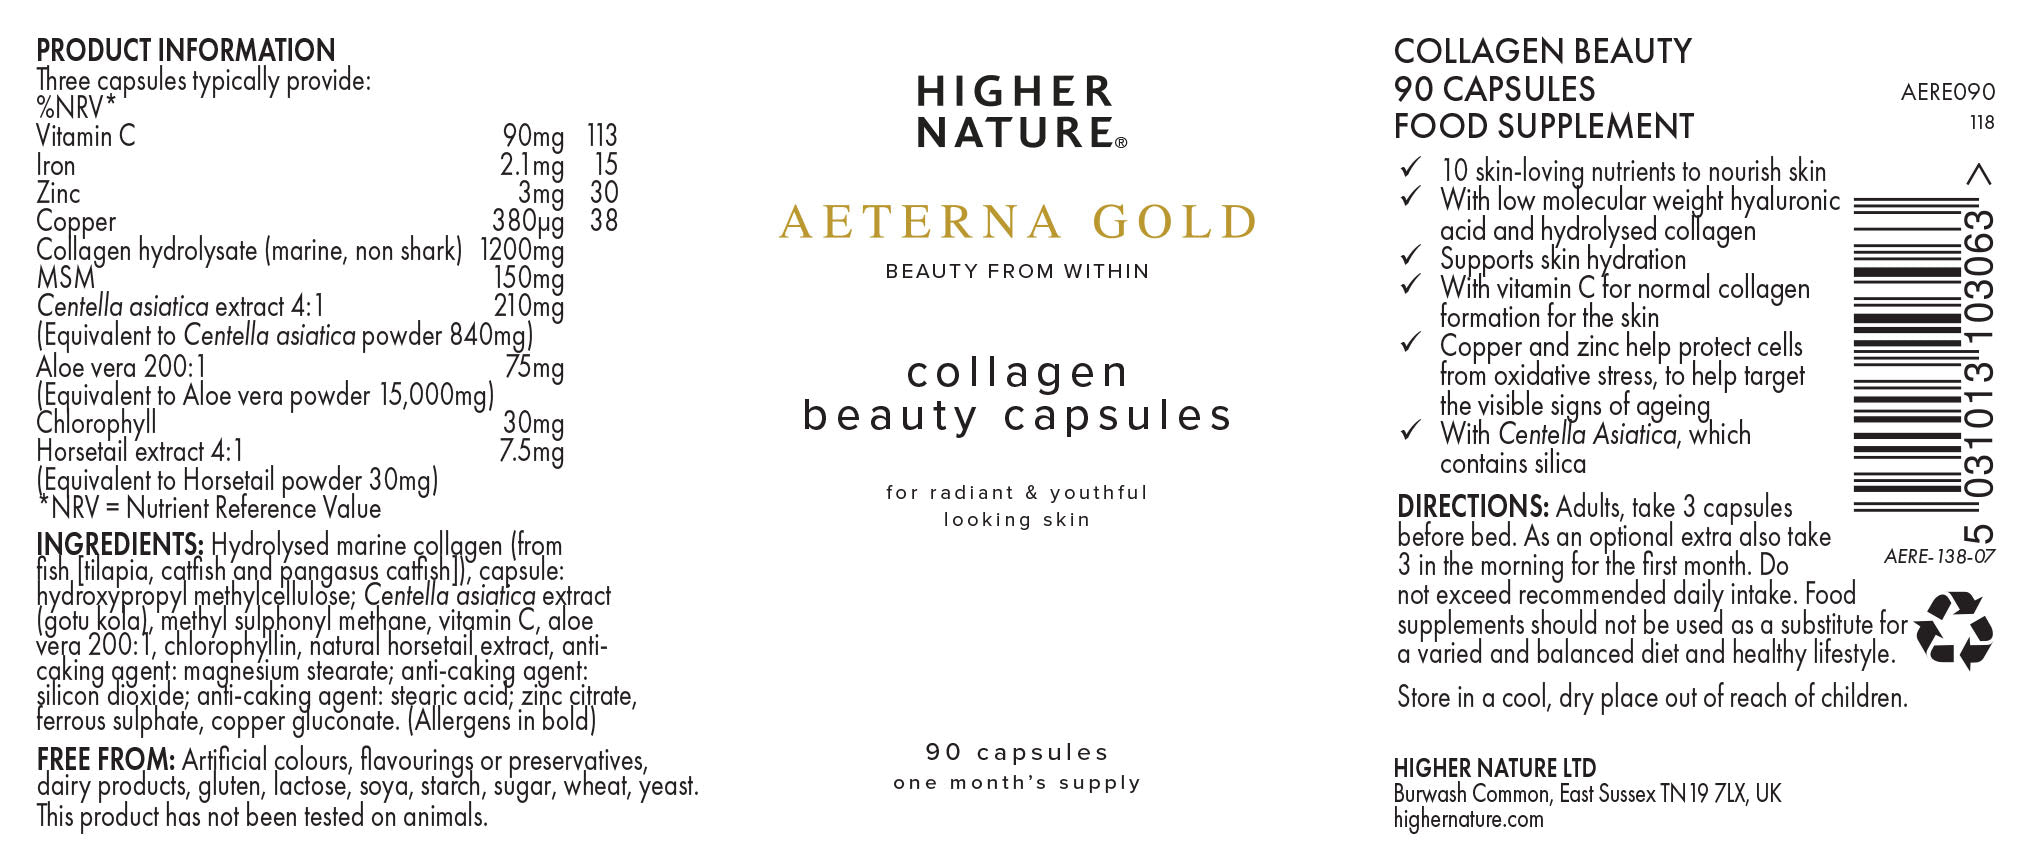 Higher Nature Aeterna Gold Collagen Beauty Capsules 90's (formerly Restructuring Complex)